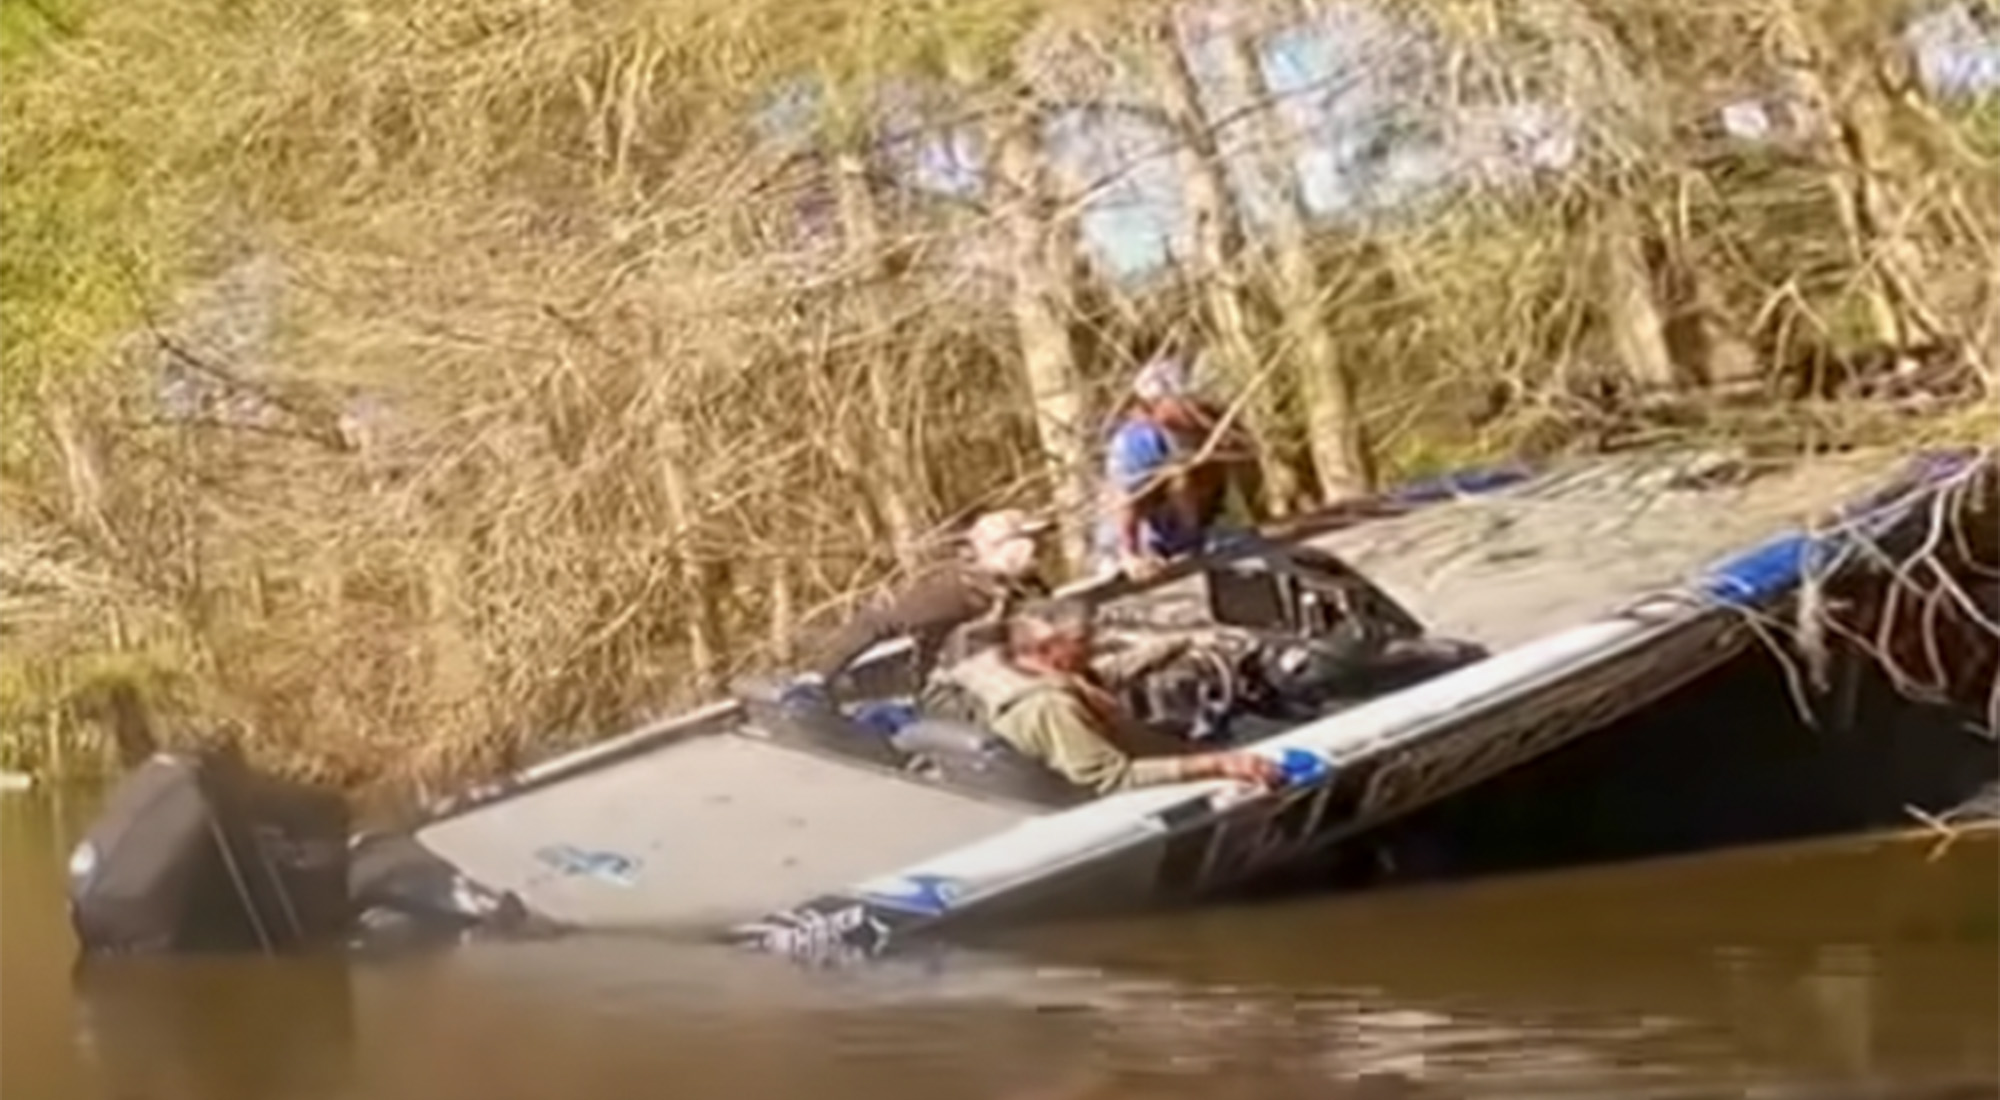 A close-up of a boat wreck at a bass fishing tournament in Florida.